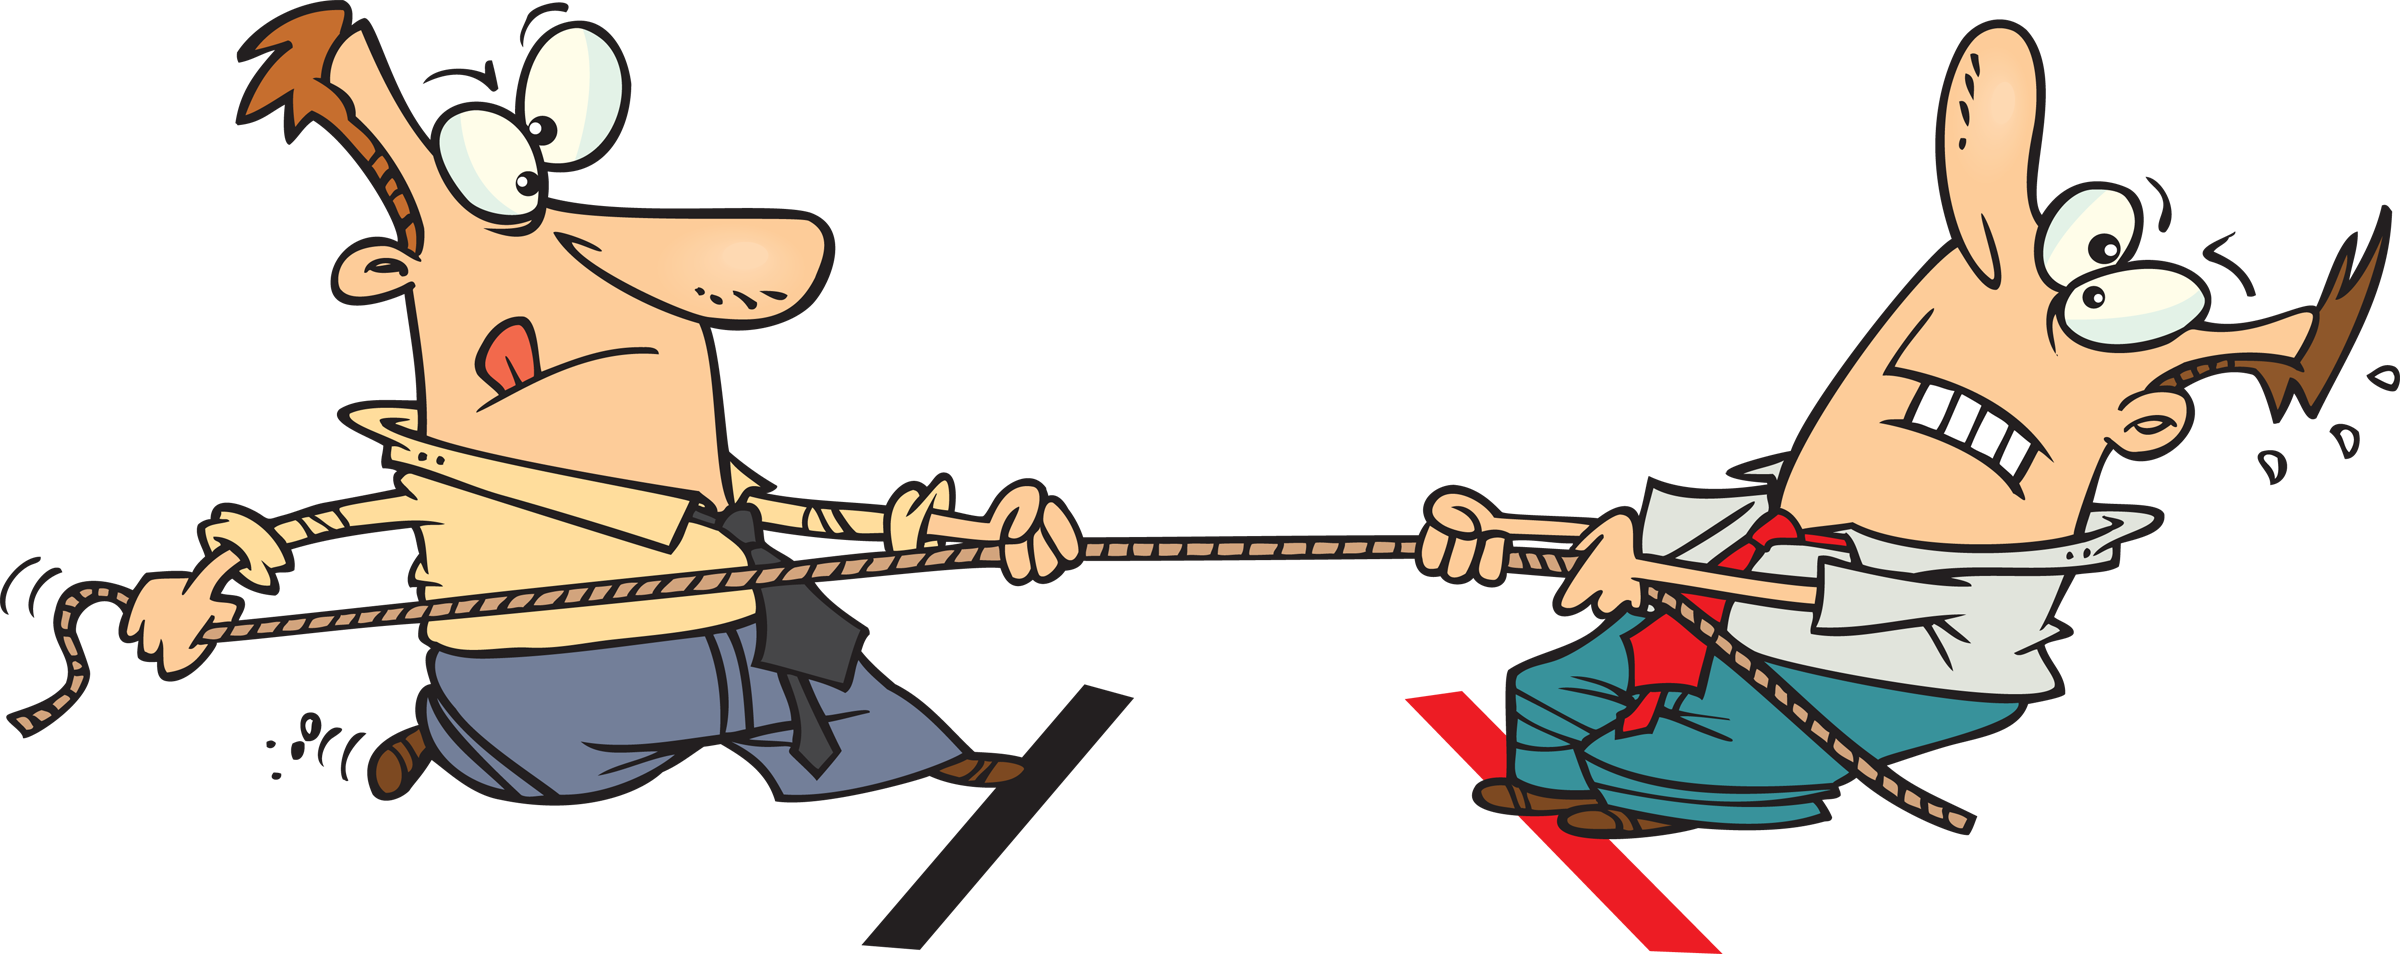 Animated Tug Of War Clipart Pluspng 3 - Tug Of War, Transparent background PNG HD thumbnail